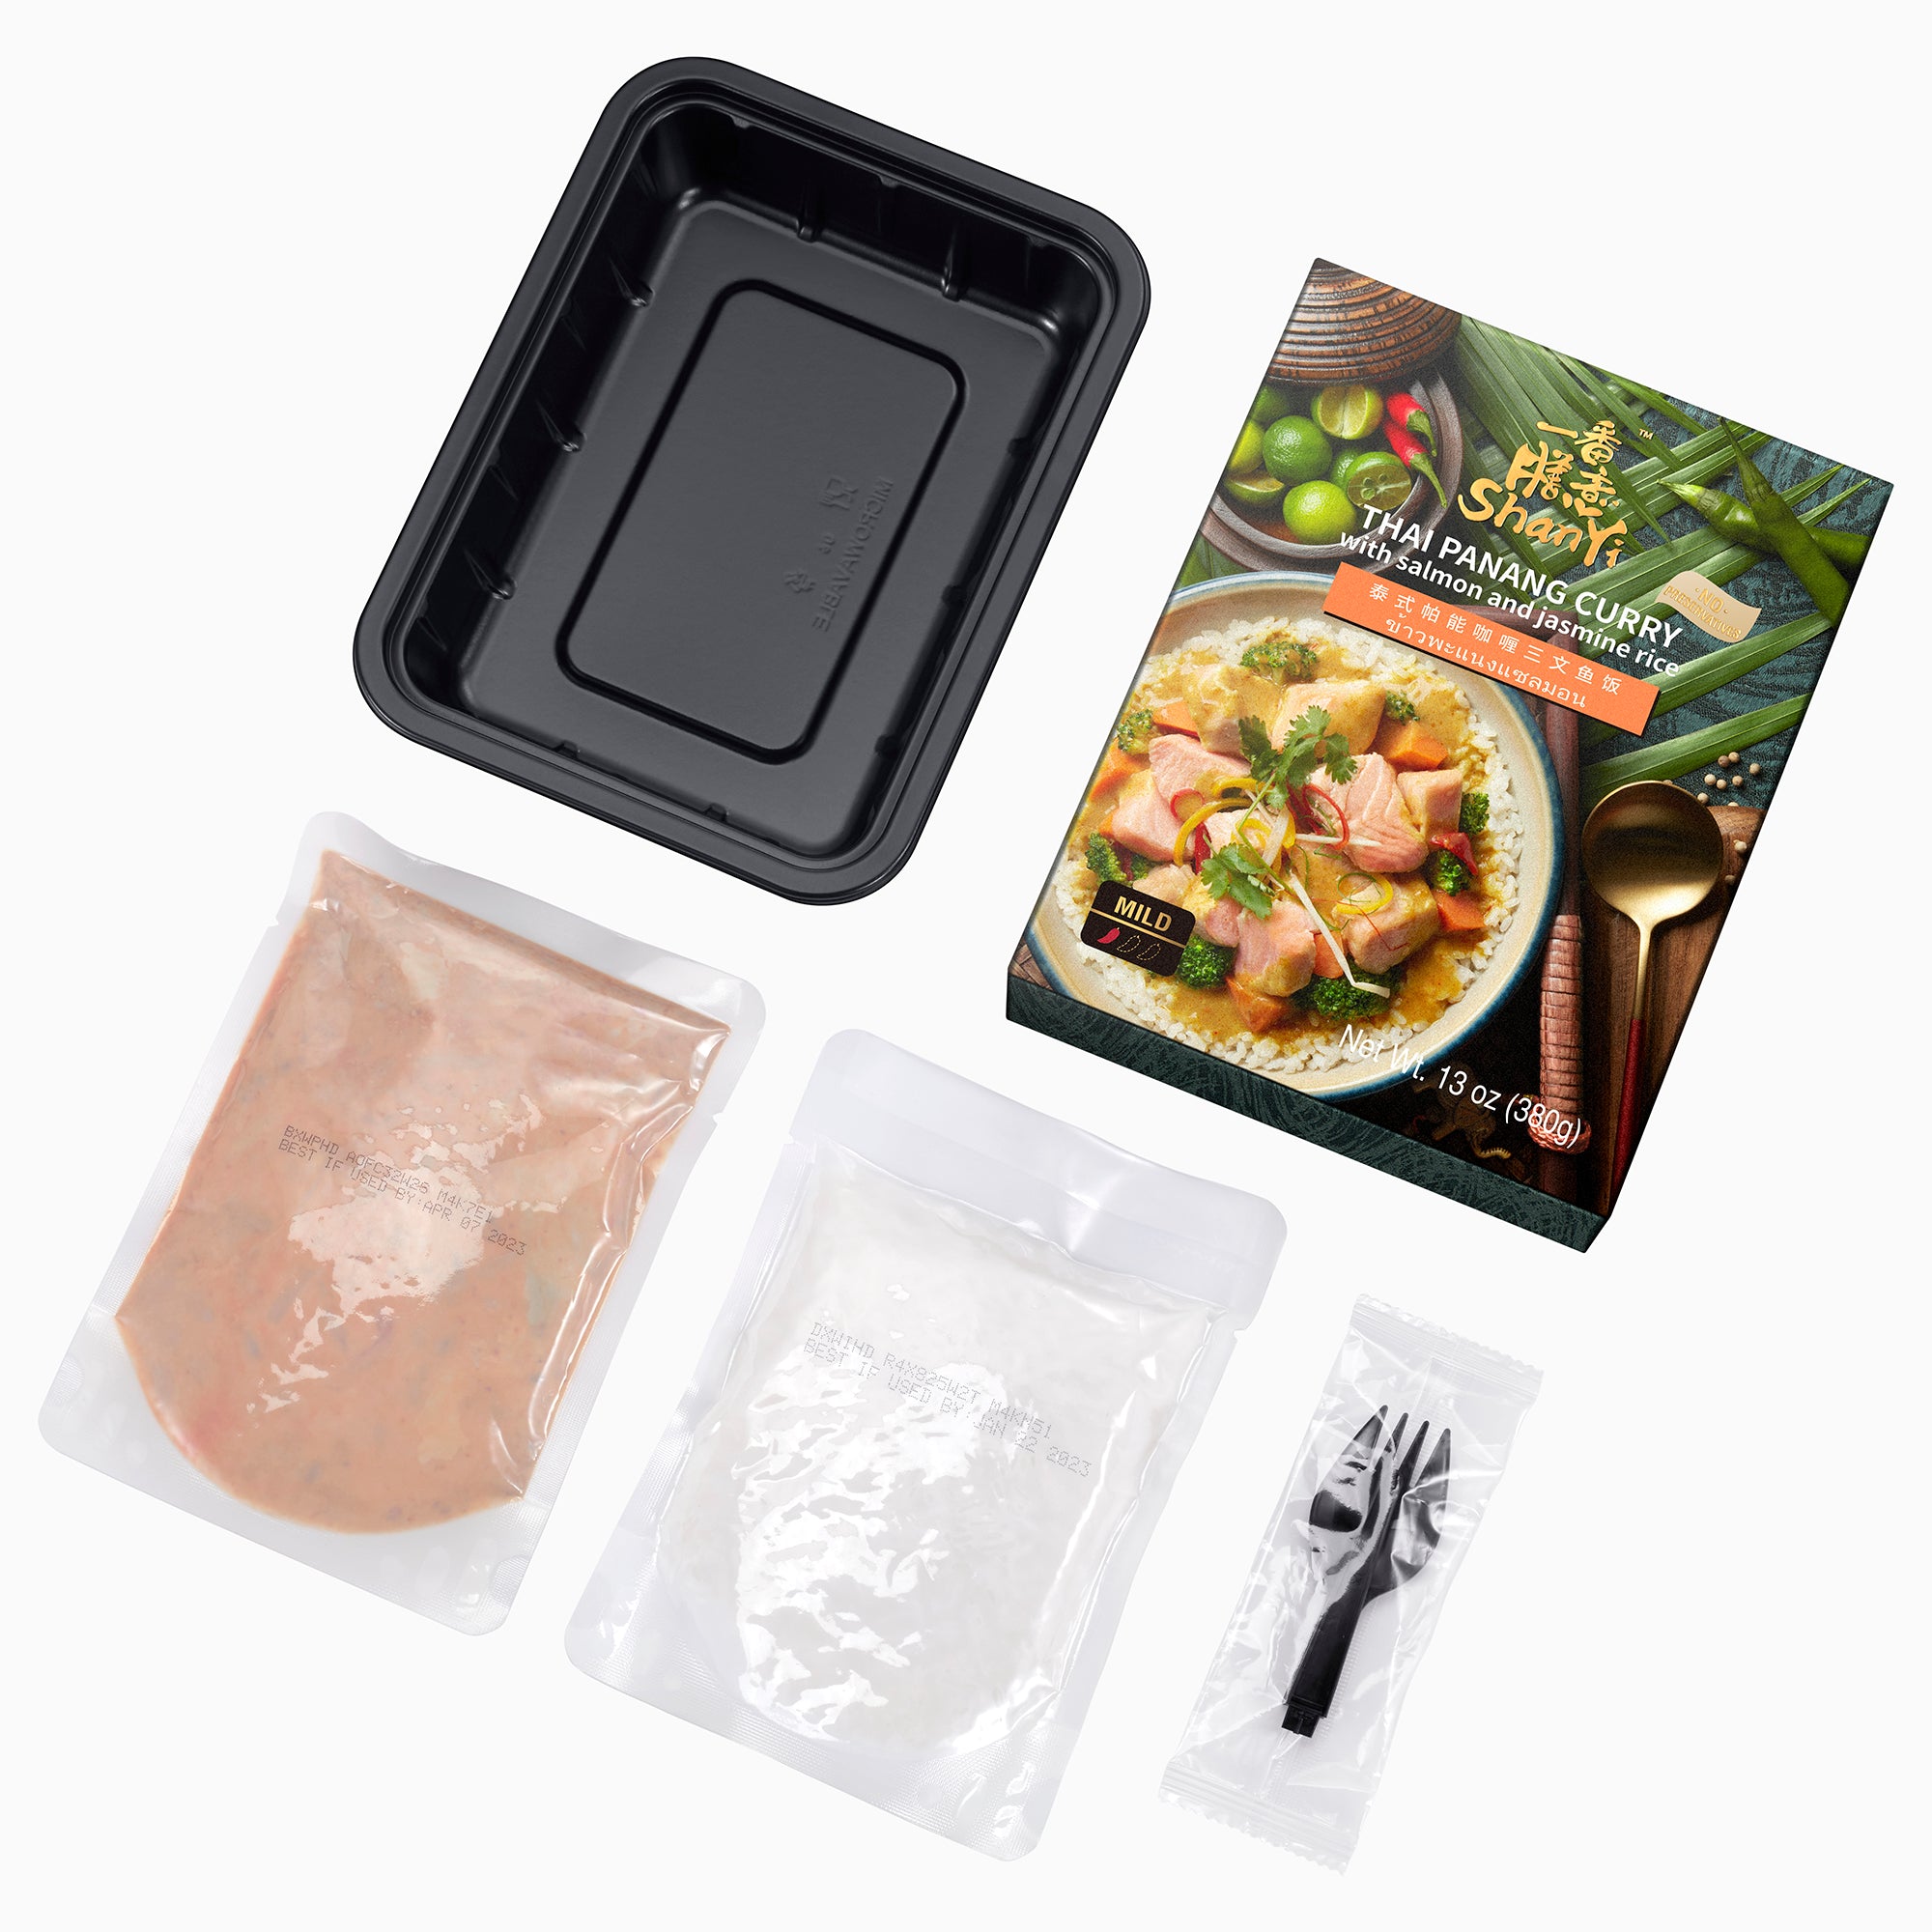 ShanYi Instant Microwave Meals Ready to Eat, 380g/13oz, Thai Panang Curry with Tuna and Jasmine Rice, Prepared Foods, Case of 6